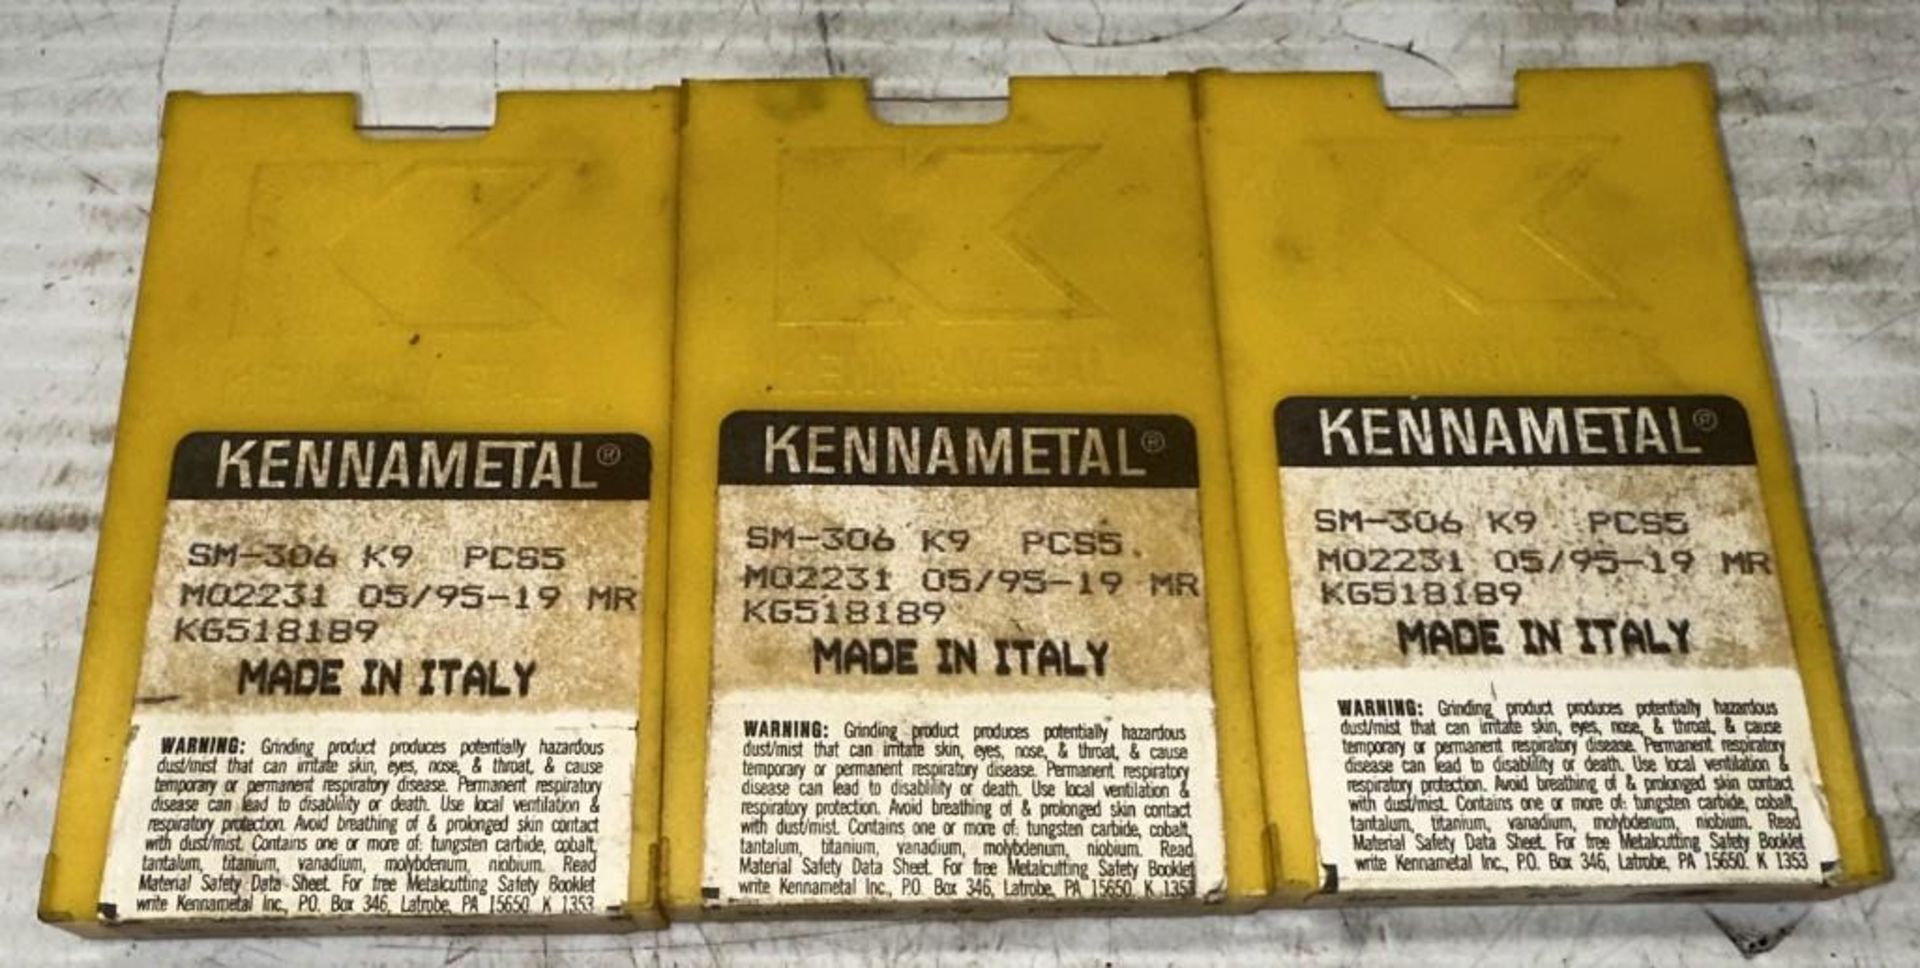 Lot of Kennametal #SM-306 K9 Carbide Inserts - Image 3 of 3